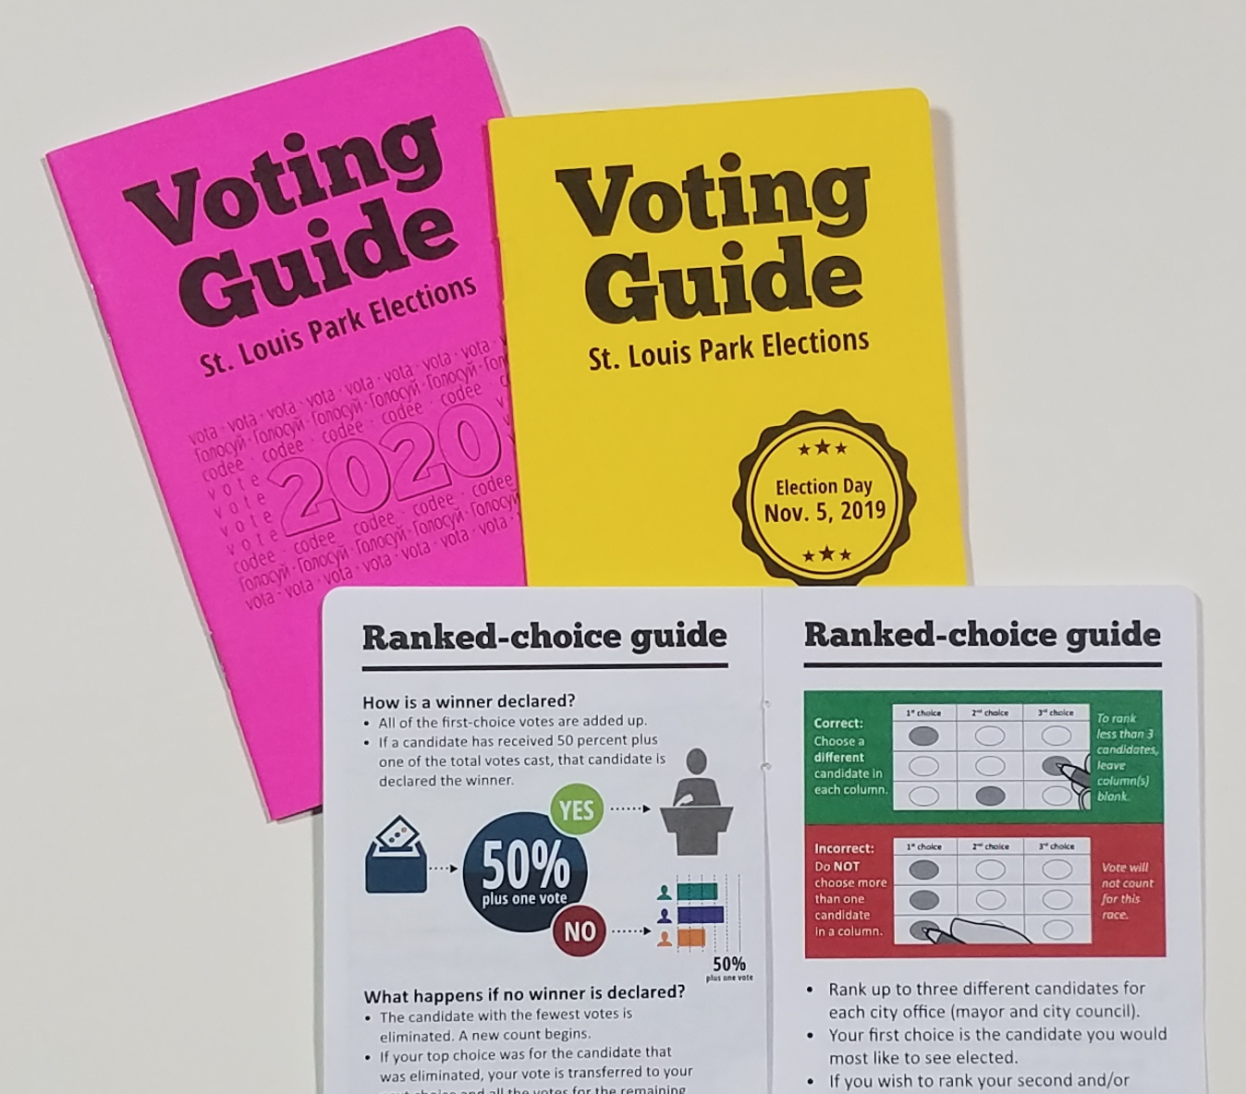 Two guides with bright colored pink and yellow covers. Open page showing ranked choice voting information